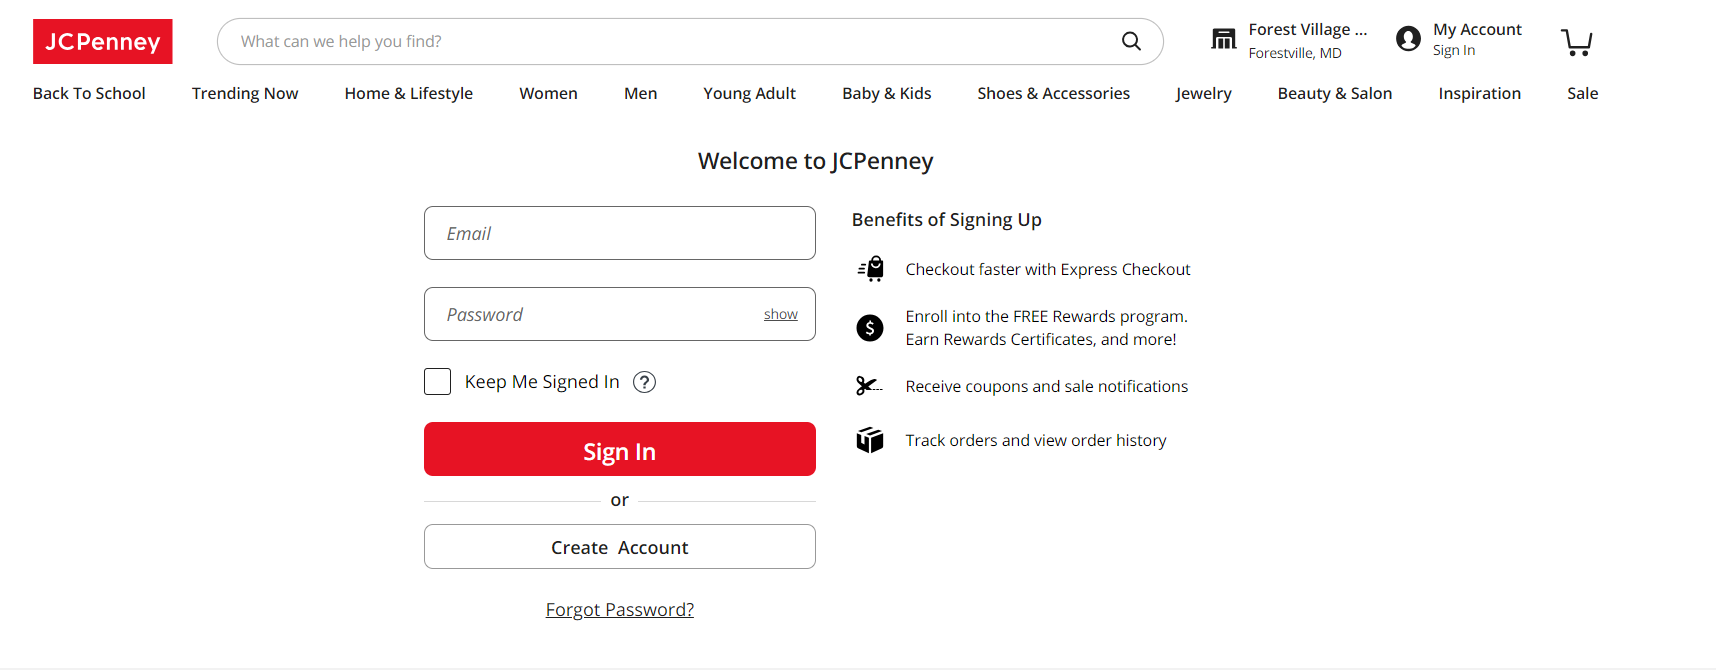 JCPenney RJCPenney Mail In Rebate Formebates Form 2023